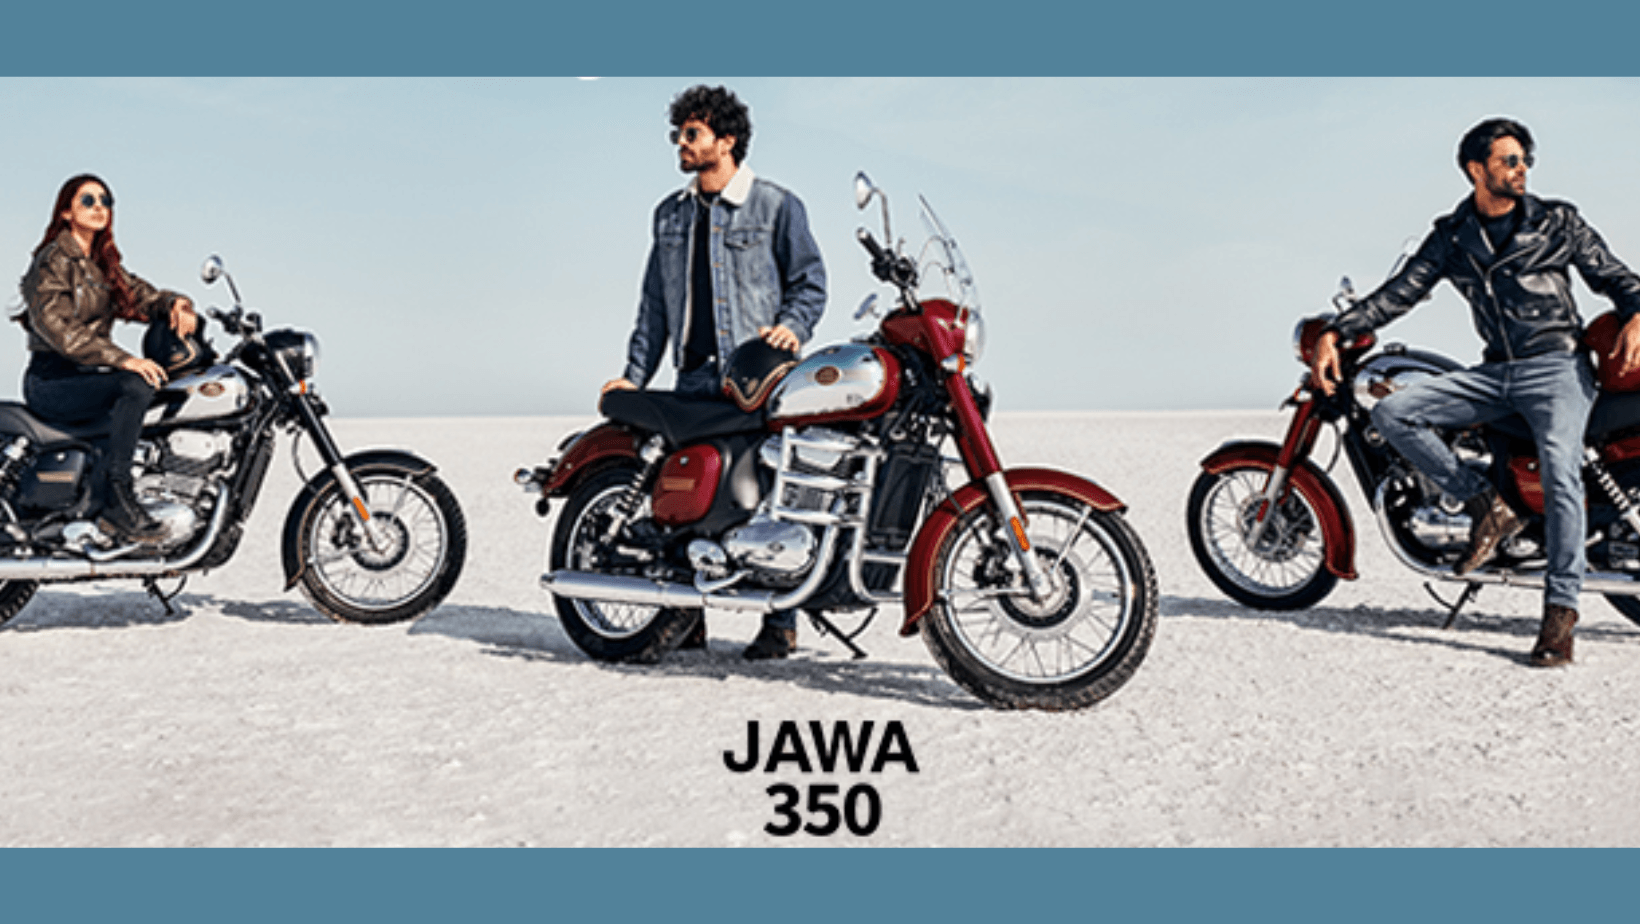 Jawa Motorcycles Launches All-New Jawa 350 with Enhanced Features and Performance news